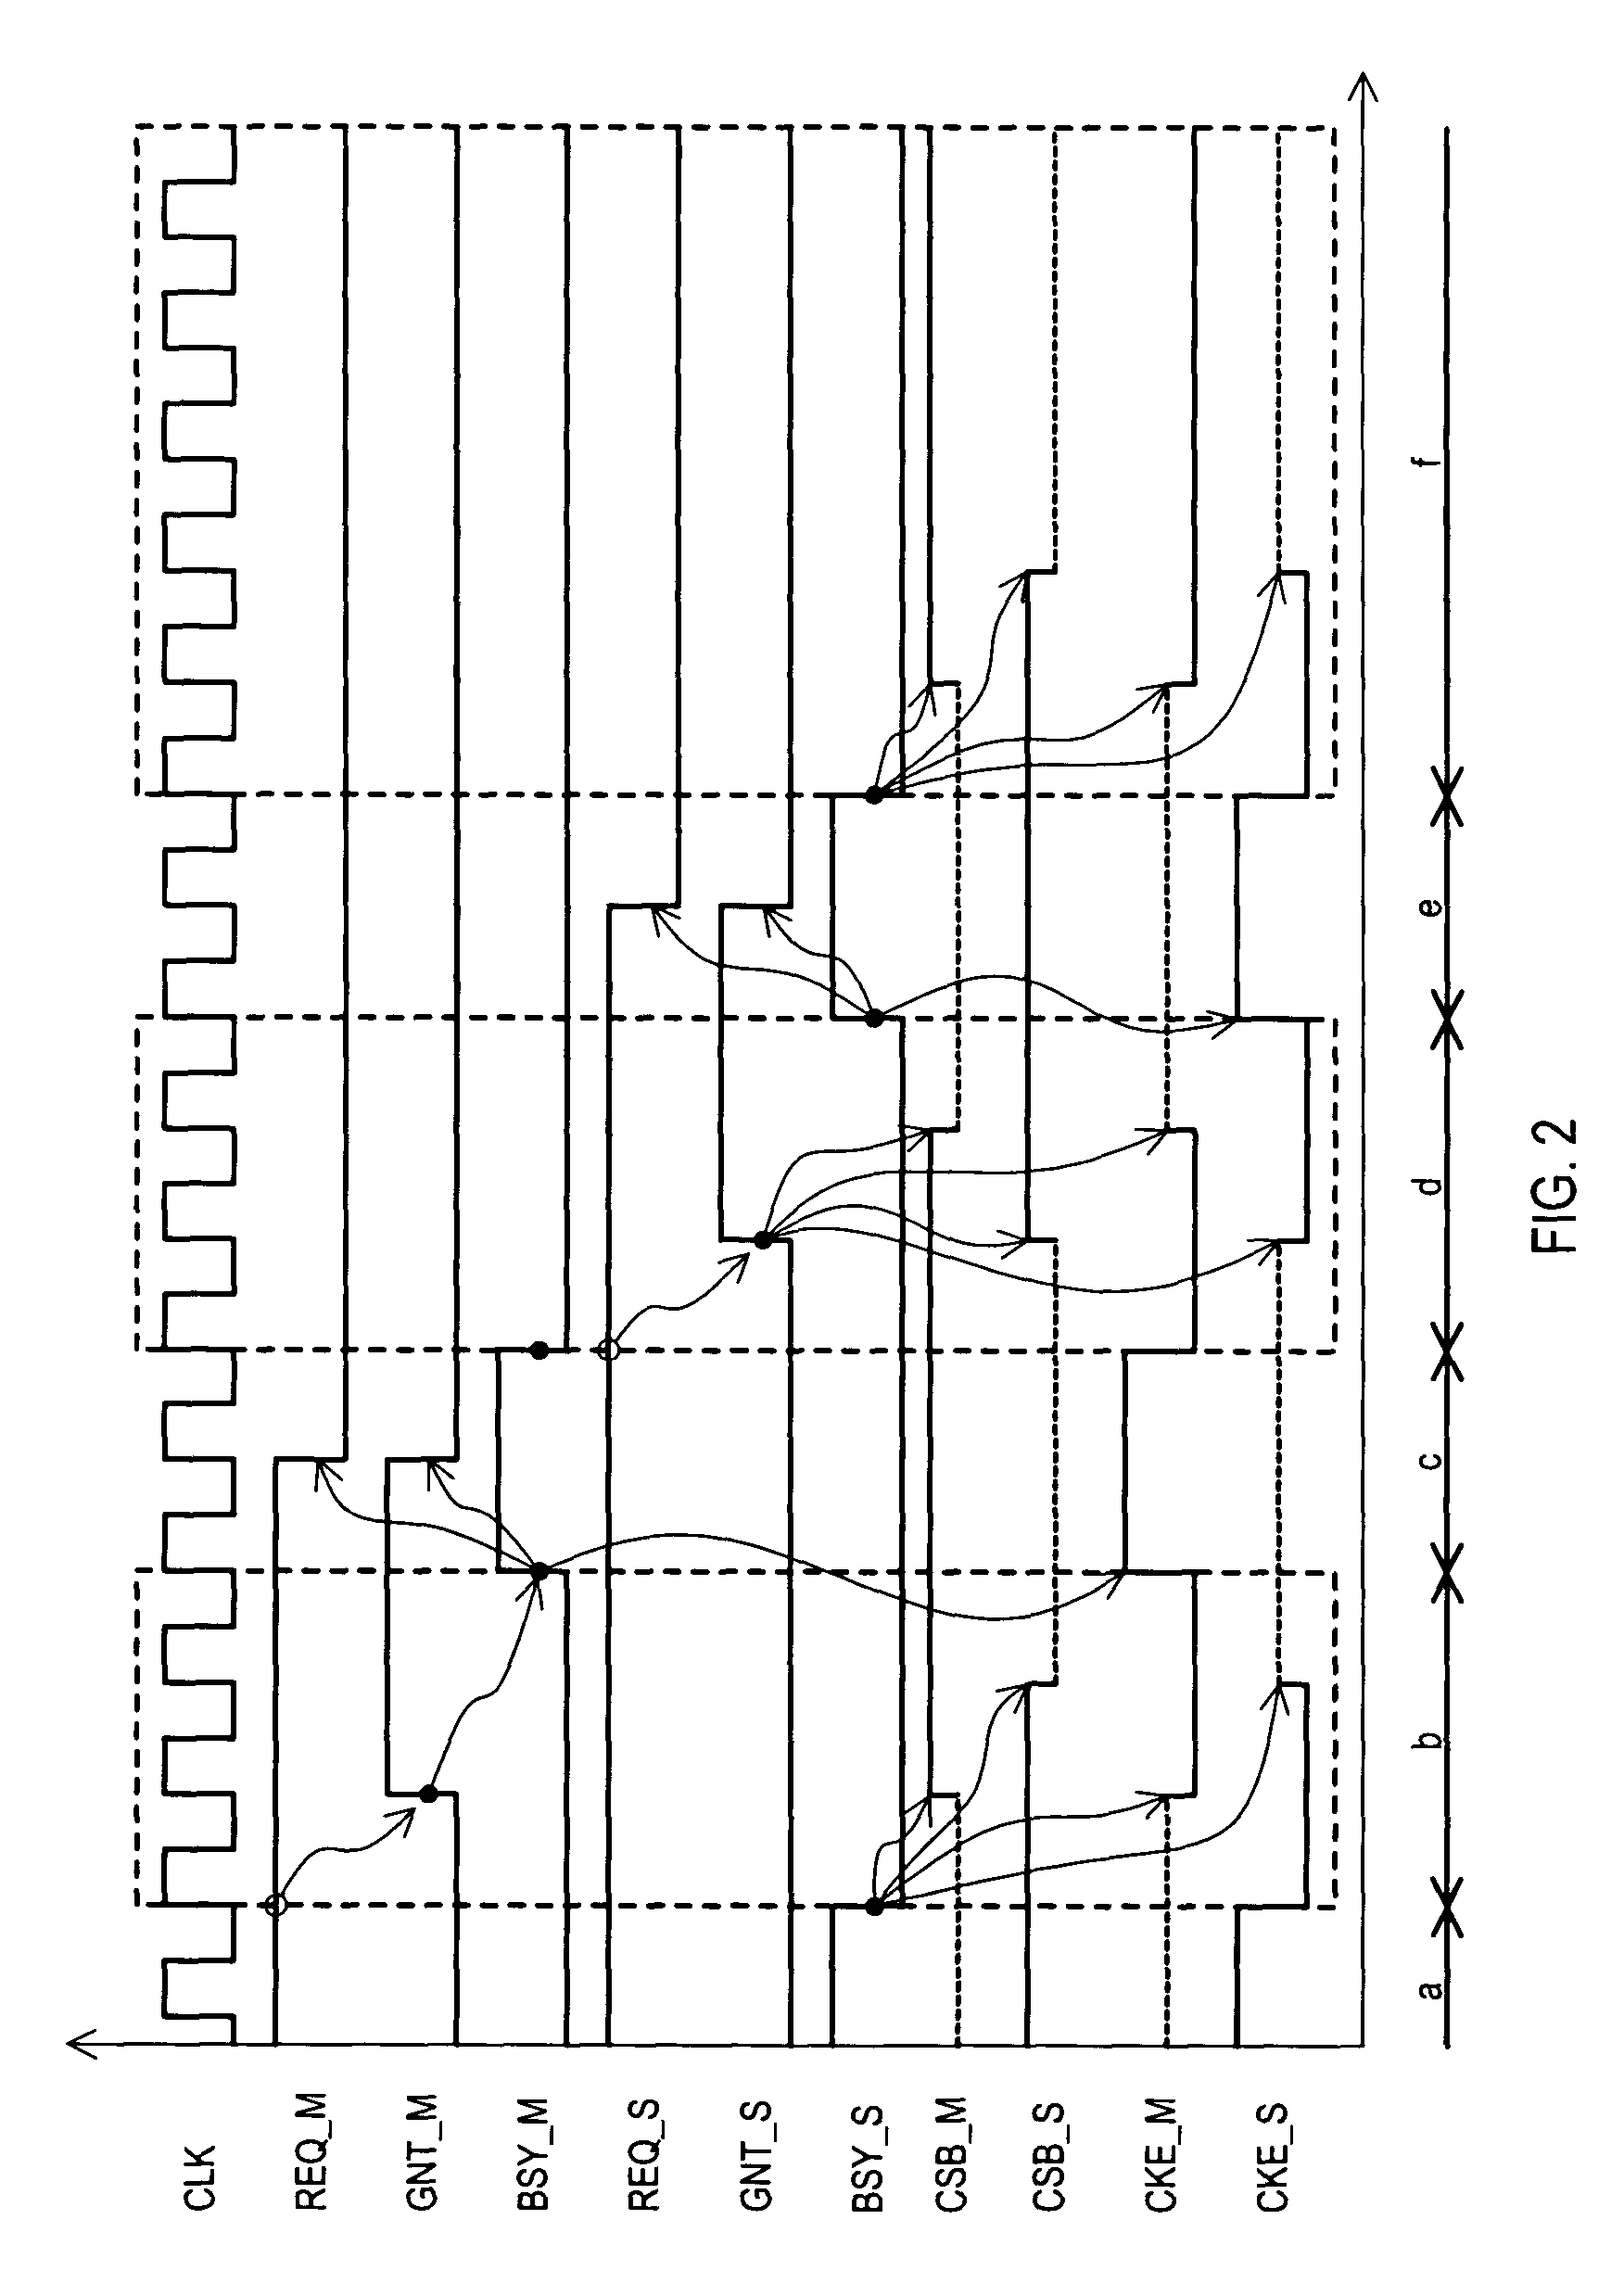 Data processing apparatus that shares a single semiconductor memory circuit among multiple data processing units